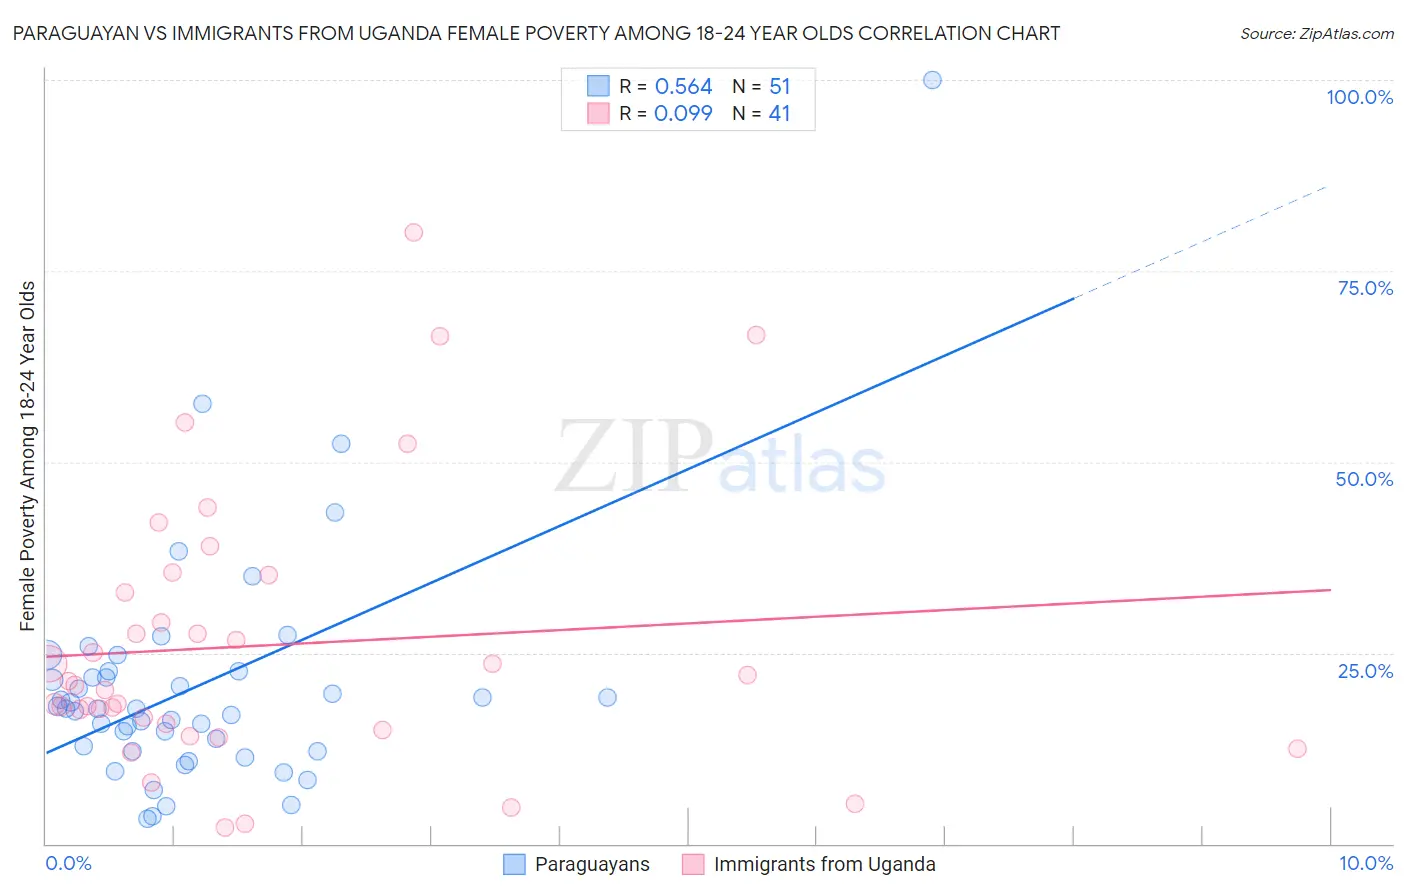 Paraguayan vs Immigrants from Uganda Female Poverty Among 18-24 Year Olds